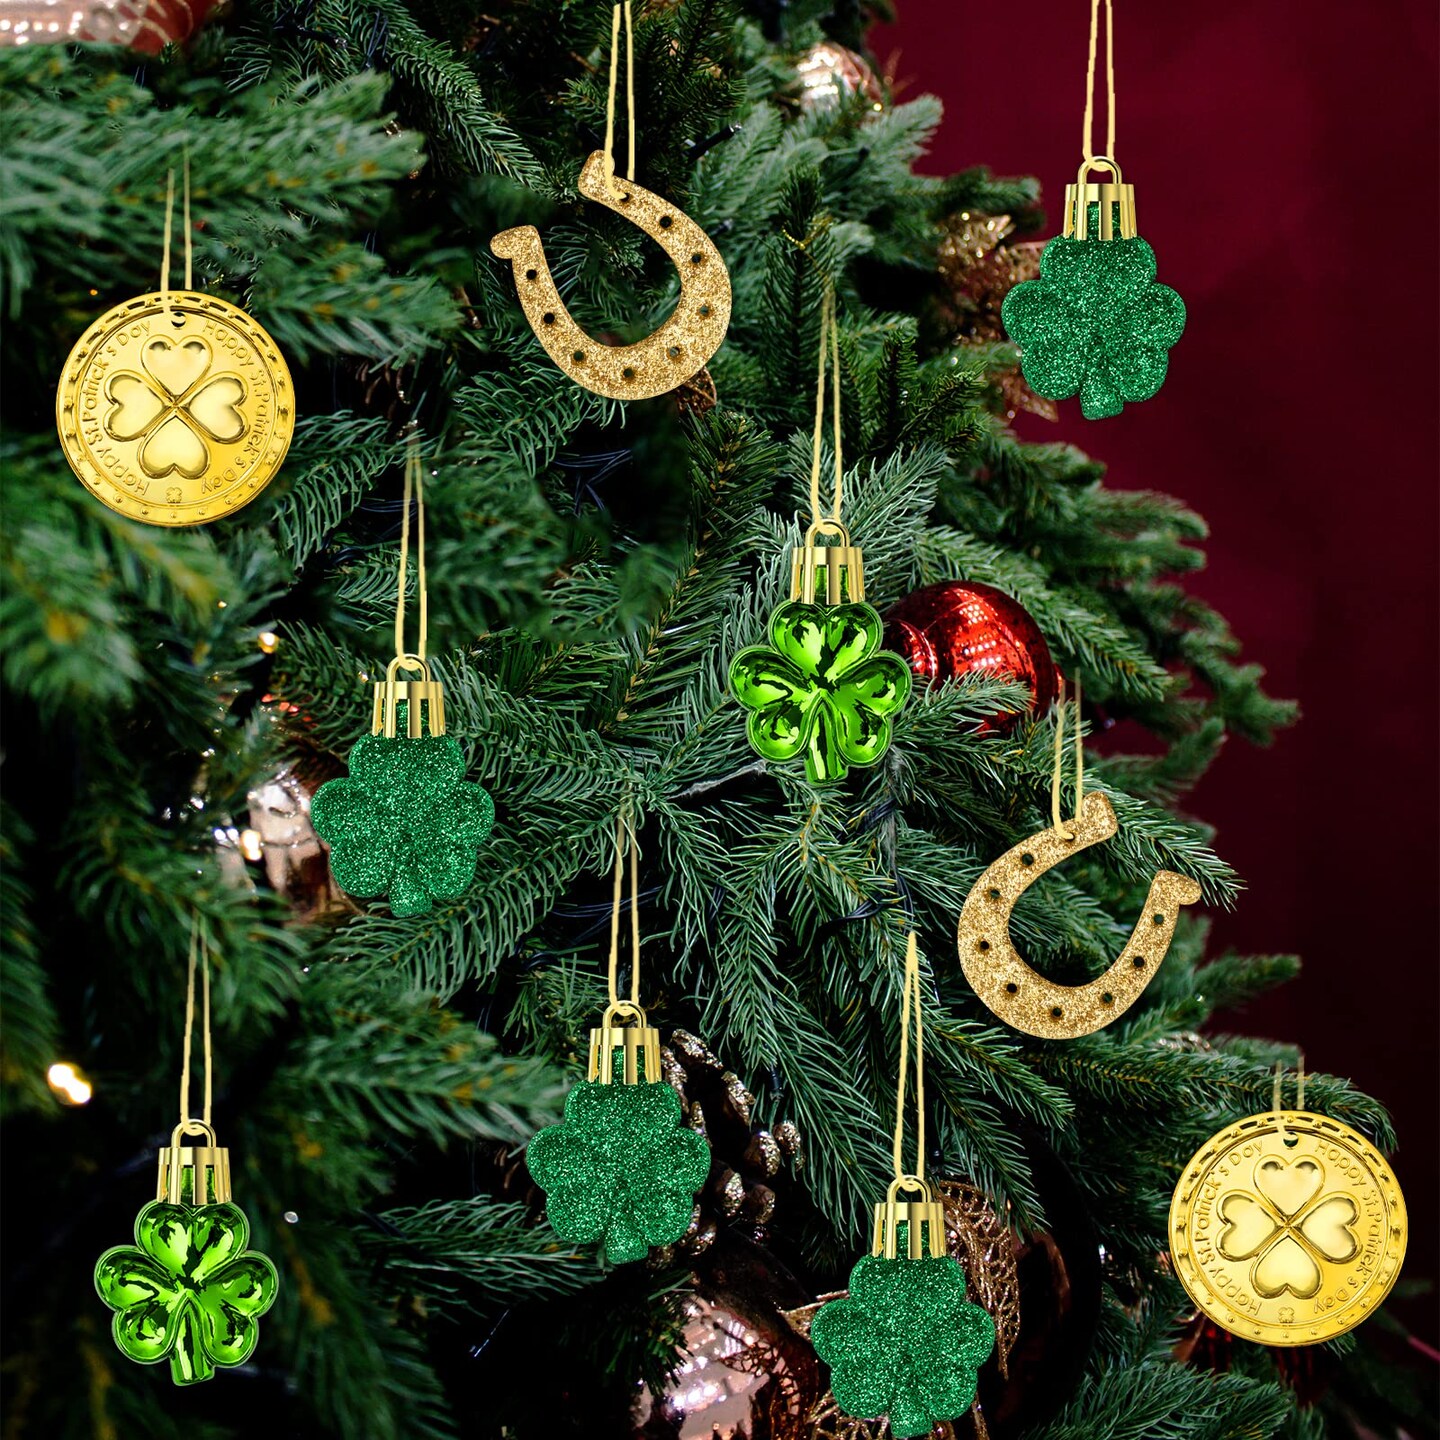 St. Patricks Day Decorations Shamrock Ornaments - 48pcs Shamrock Clover Gold Coins Horseshoe Tree Ornaments for Spring Lucky Irish Day St Patrick&#x27;s Day Home Table Tree Party Hanging Decorations